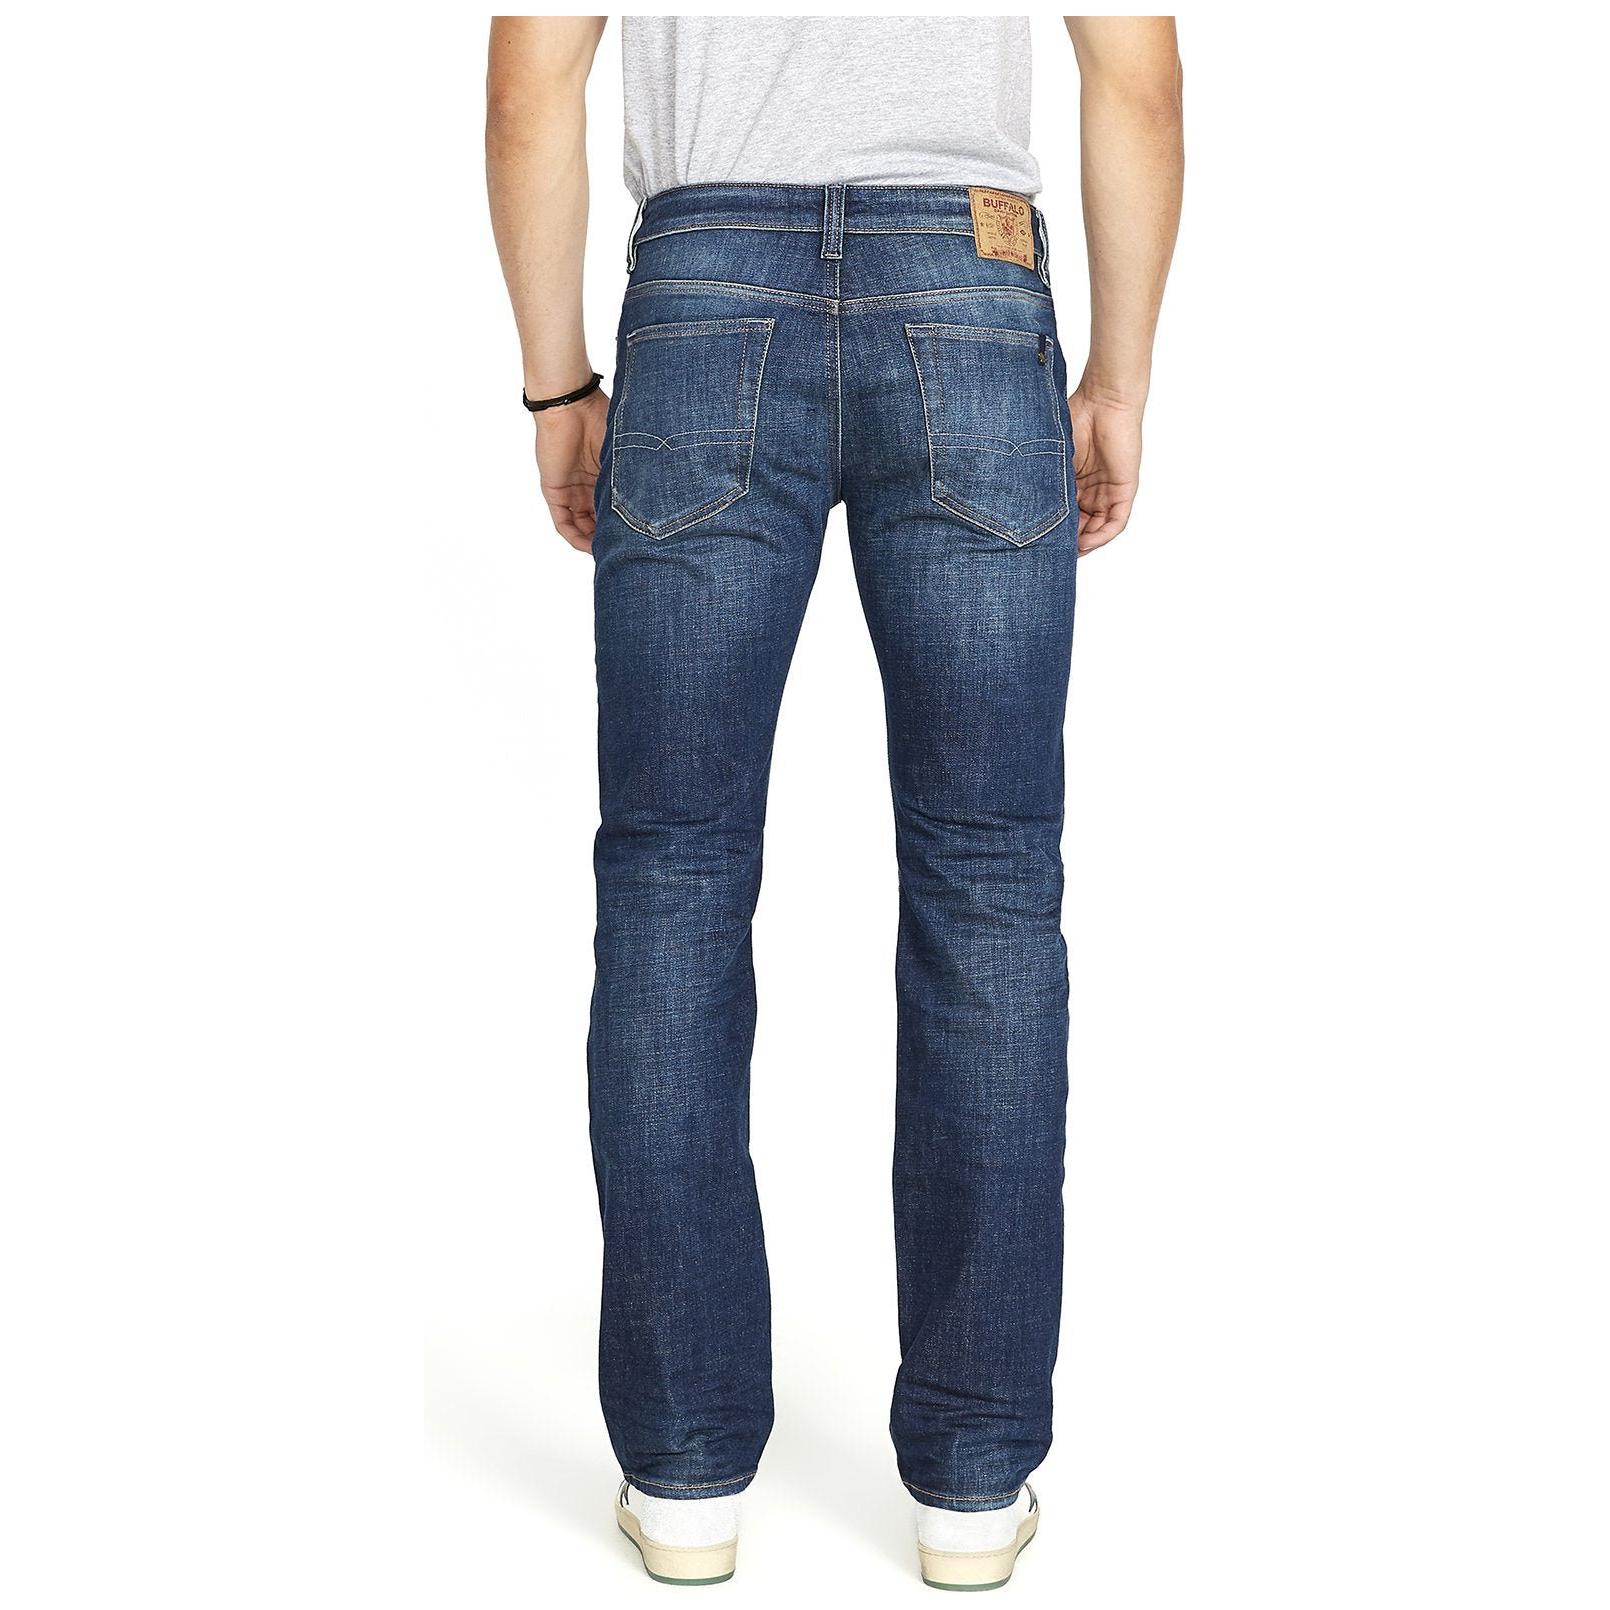 Buffalo - Driven Relaxed Straight in Sanded Indigo - BM22640-SQ8626575